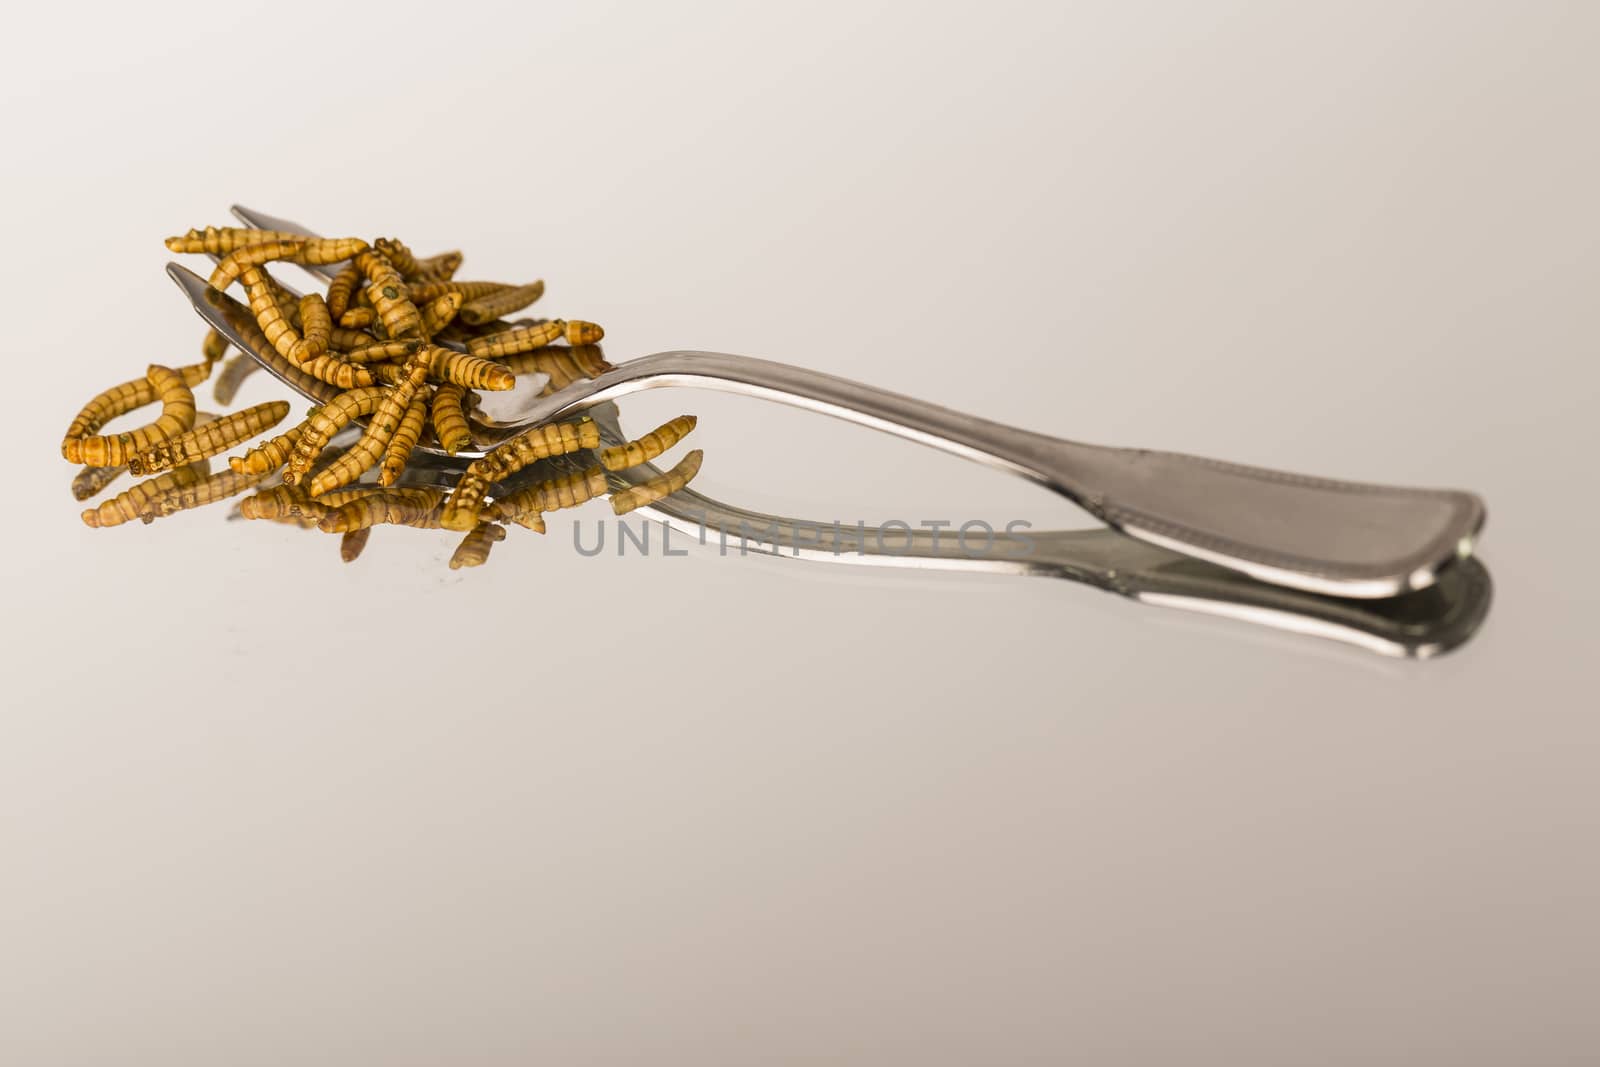 Fried insect, Molitors, Food of the future